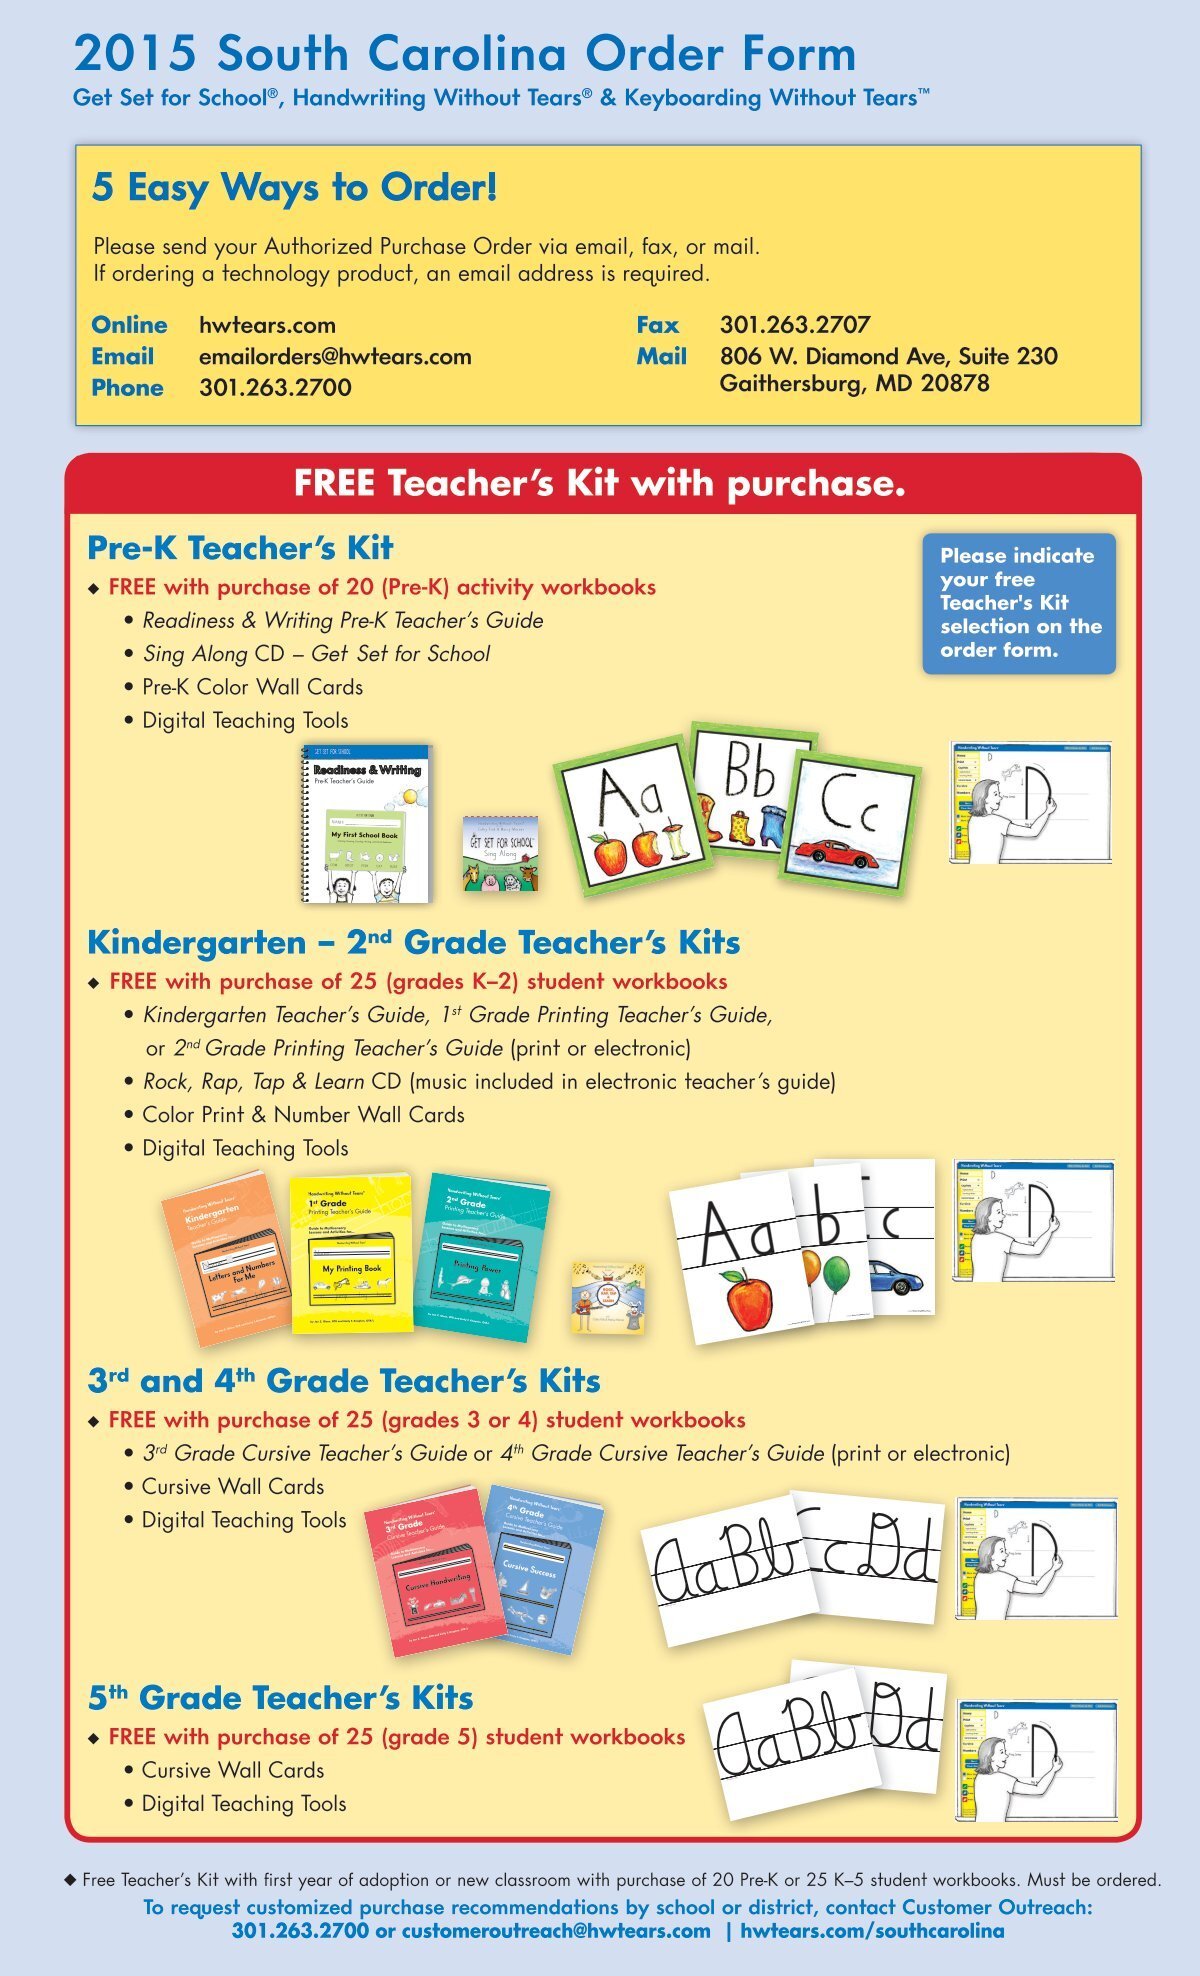  Handwriting Without Tears 1st Grade Printing Bundle - Includes  My Printing Book Student Workbook, Teacher's Guide, Writing Journal B,  Pencils for Small Hands : Office Products